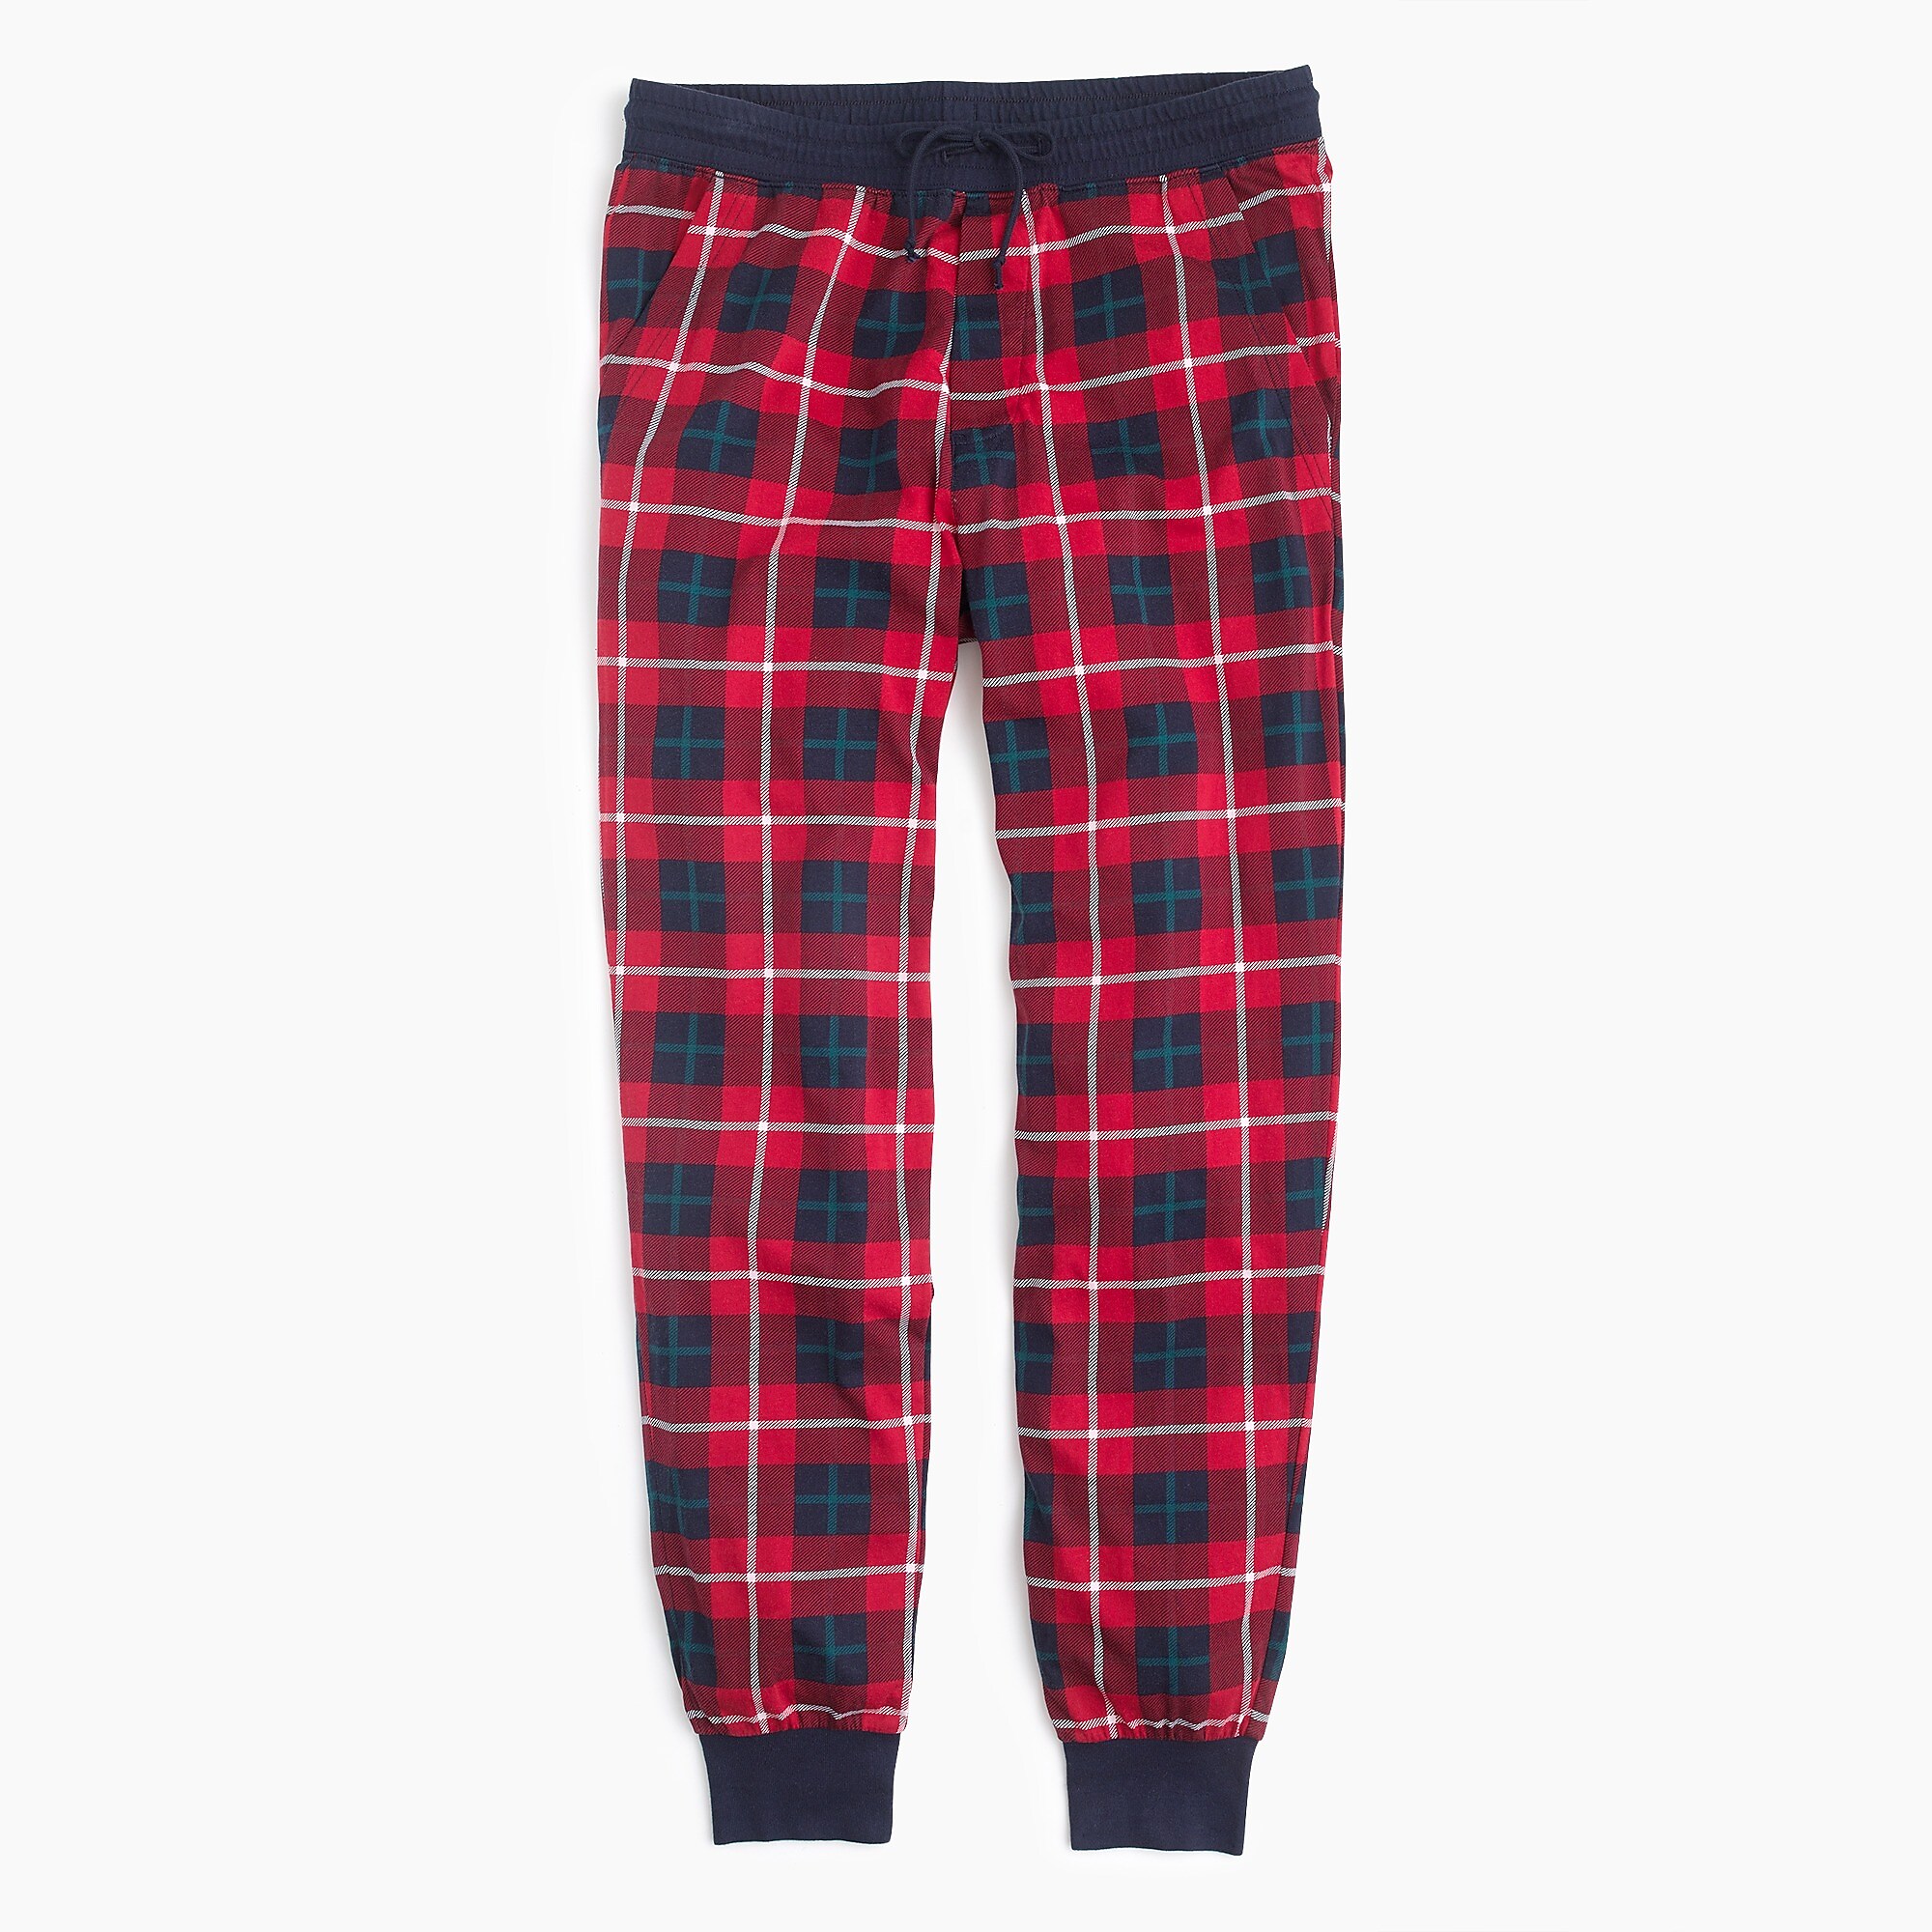 Flannel lounge pant in red check : Men underwear & pajamas | J.Crew